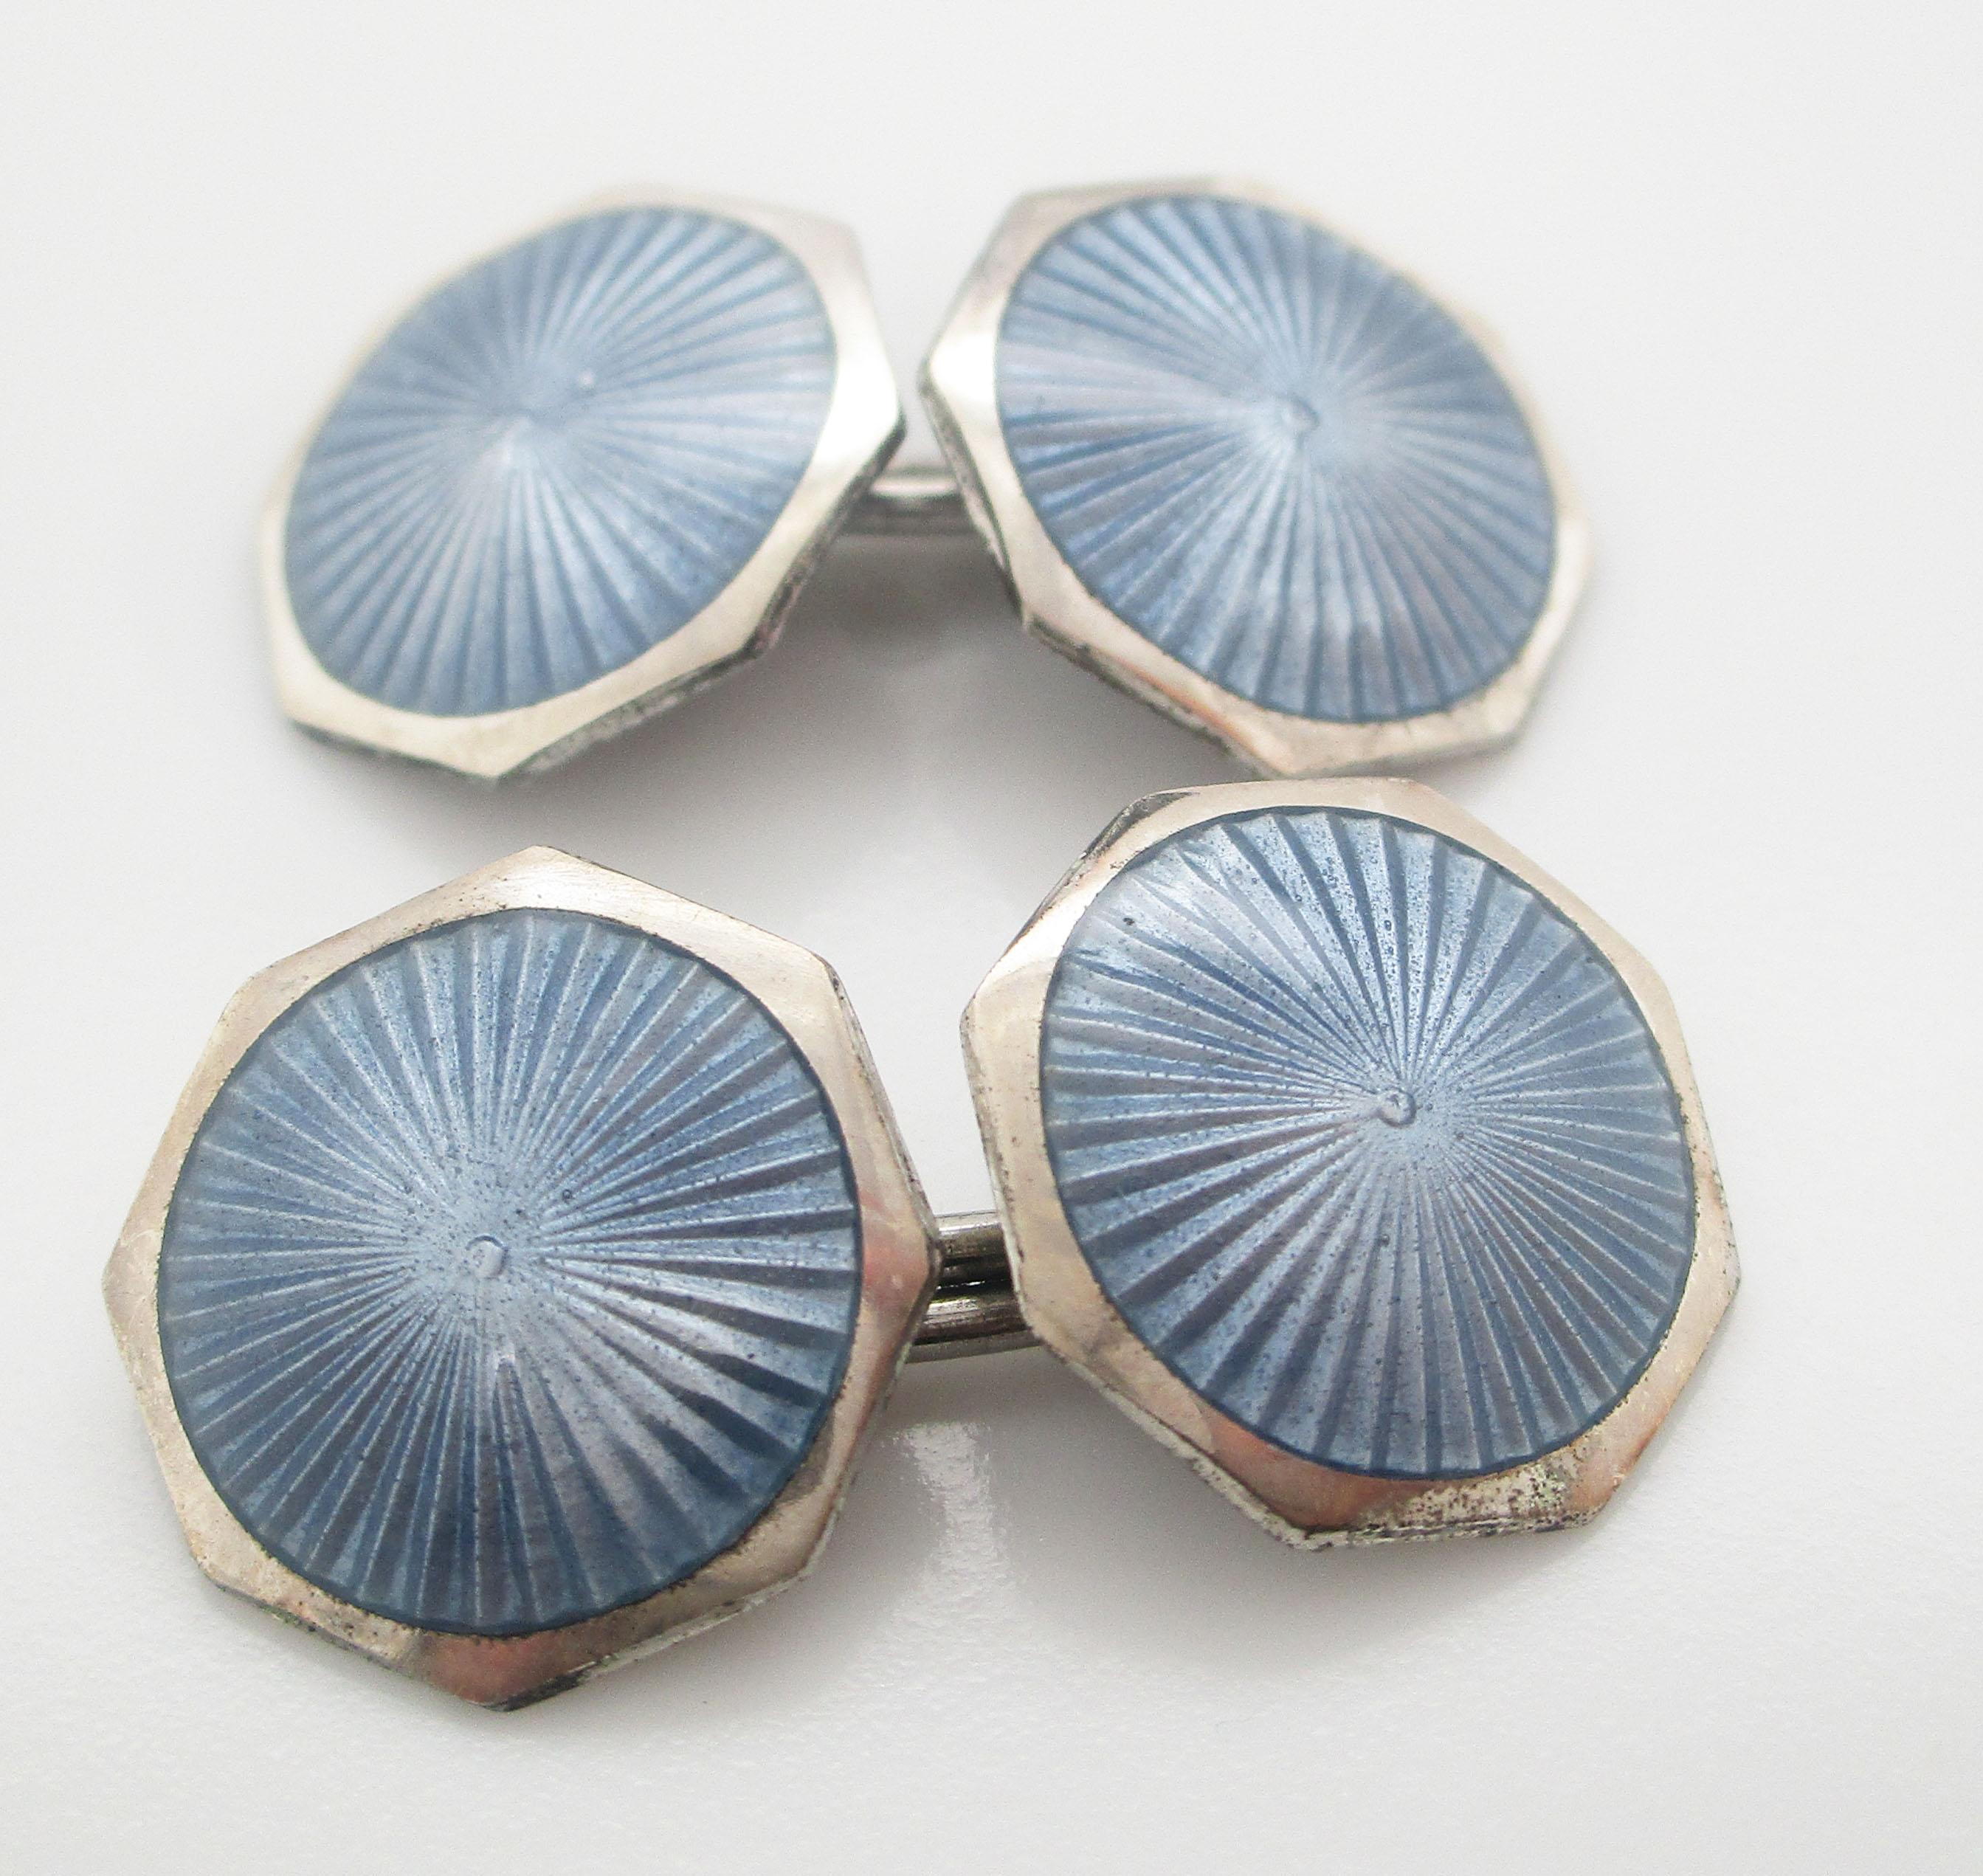 These cufflinks deliver the classic elegance of the Art Deco era in an elegant combination of sterling silver and steel blue enamel. The links have a sleek octagonal shape with a sterling silver border and a subtly detailed radial guilloche enamel